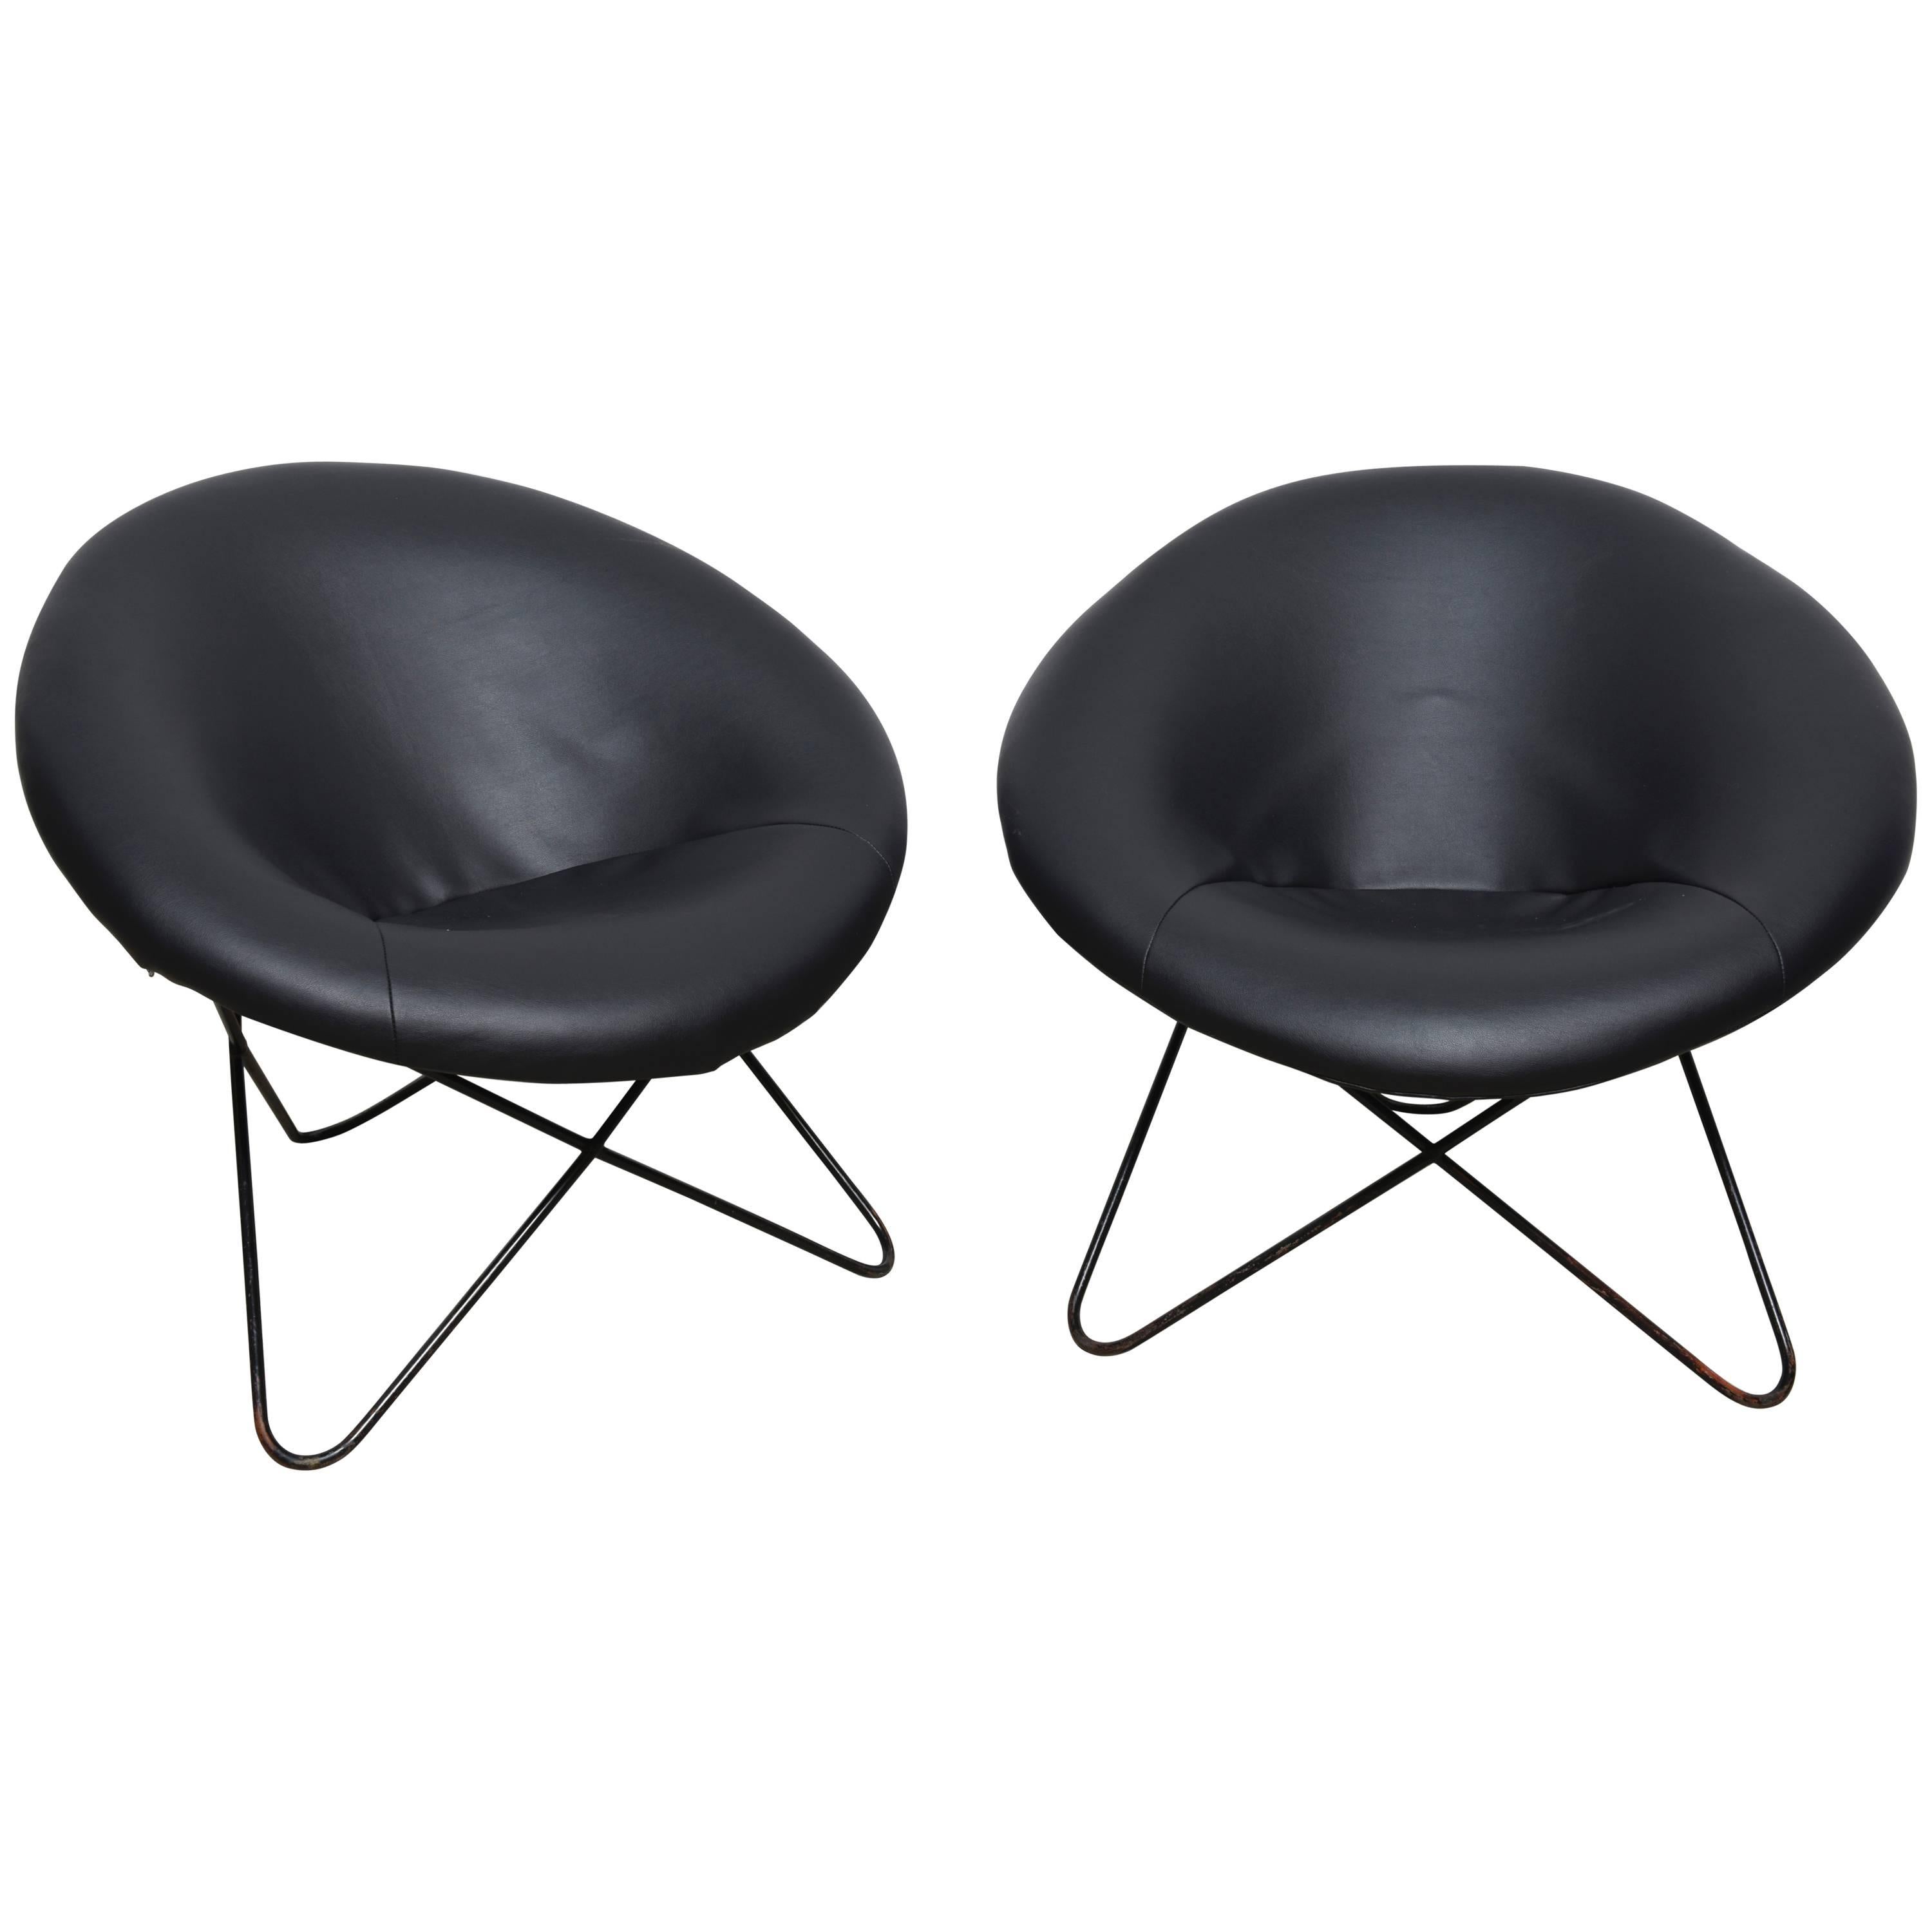 Pair of Hairpin Circle Chairs, 1950s by Jean Royère, France